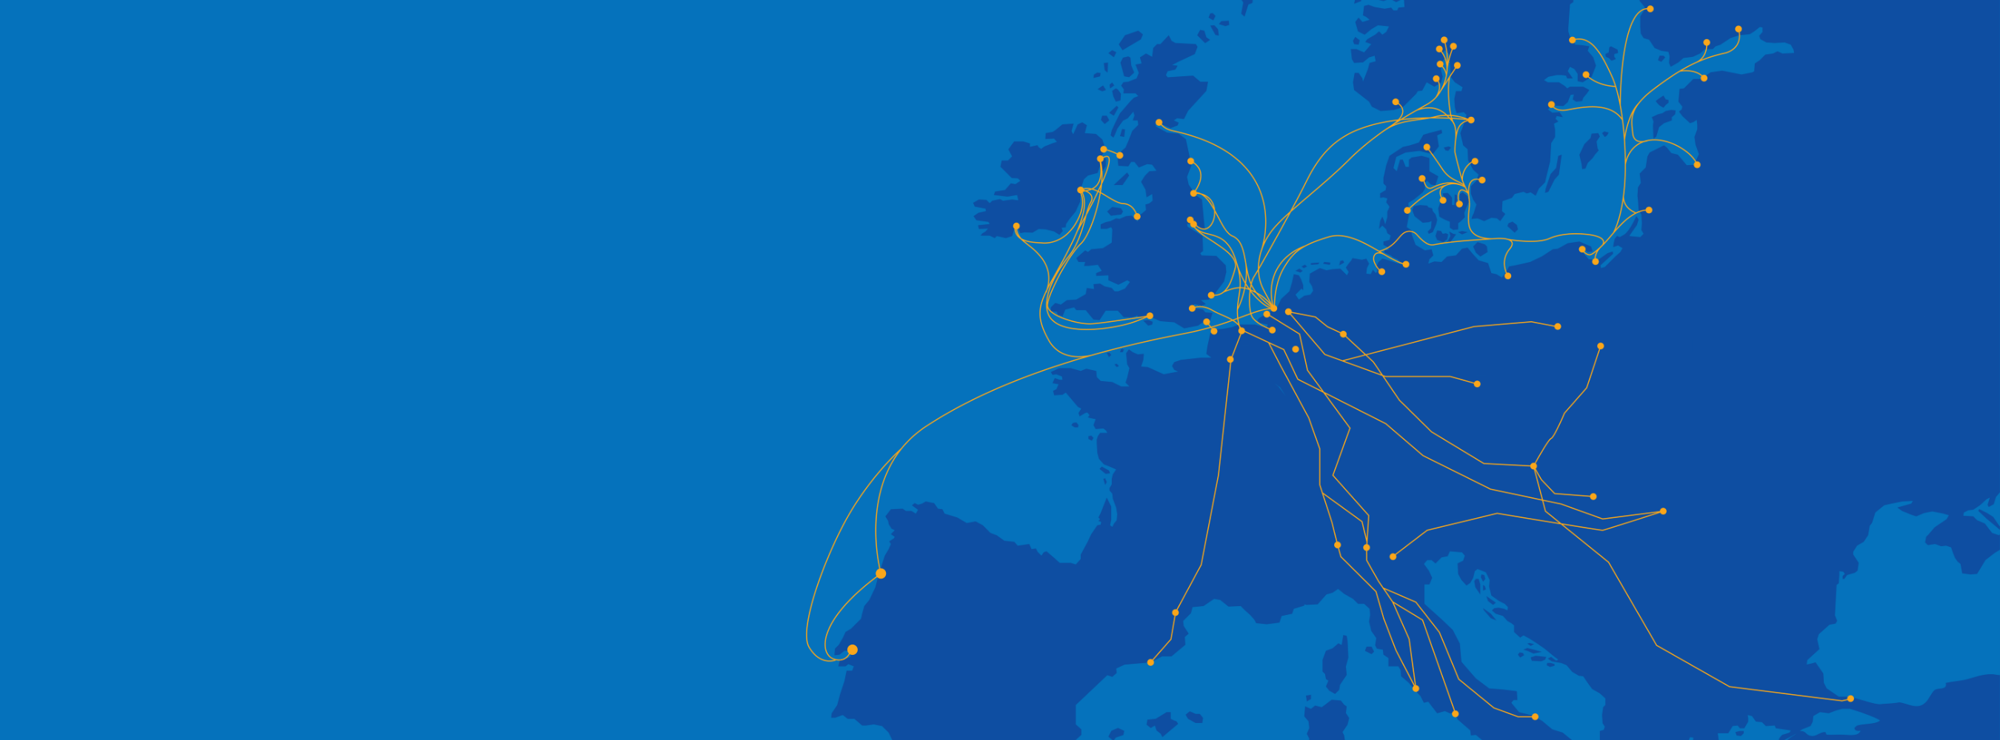 Long - PO Ferrymasters combined network (2700 × 1000 px)